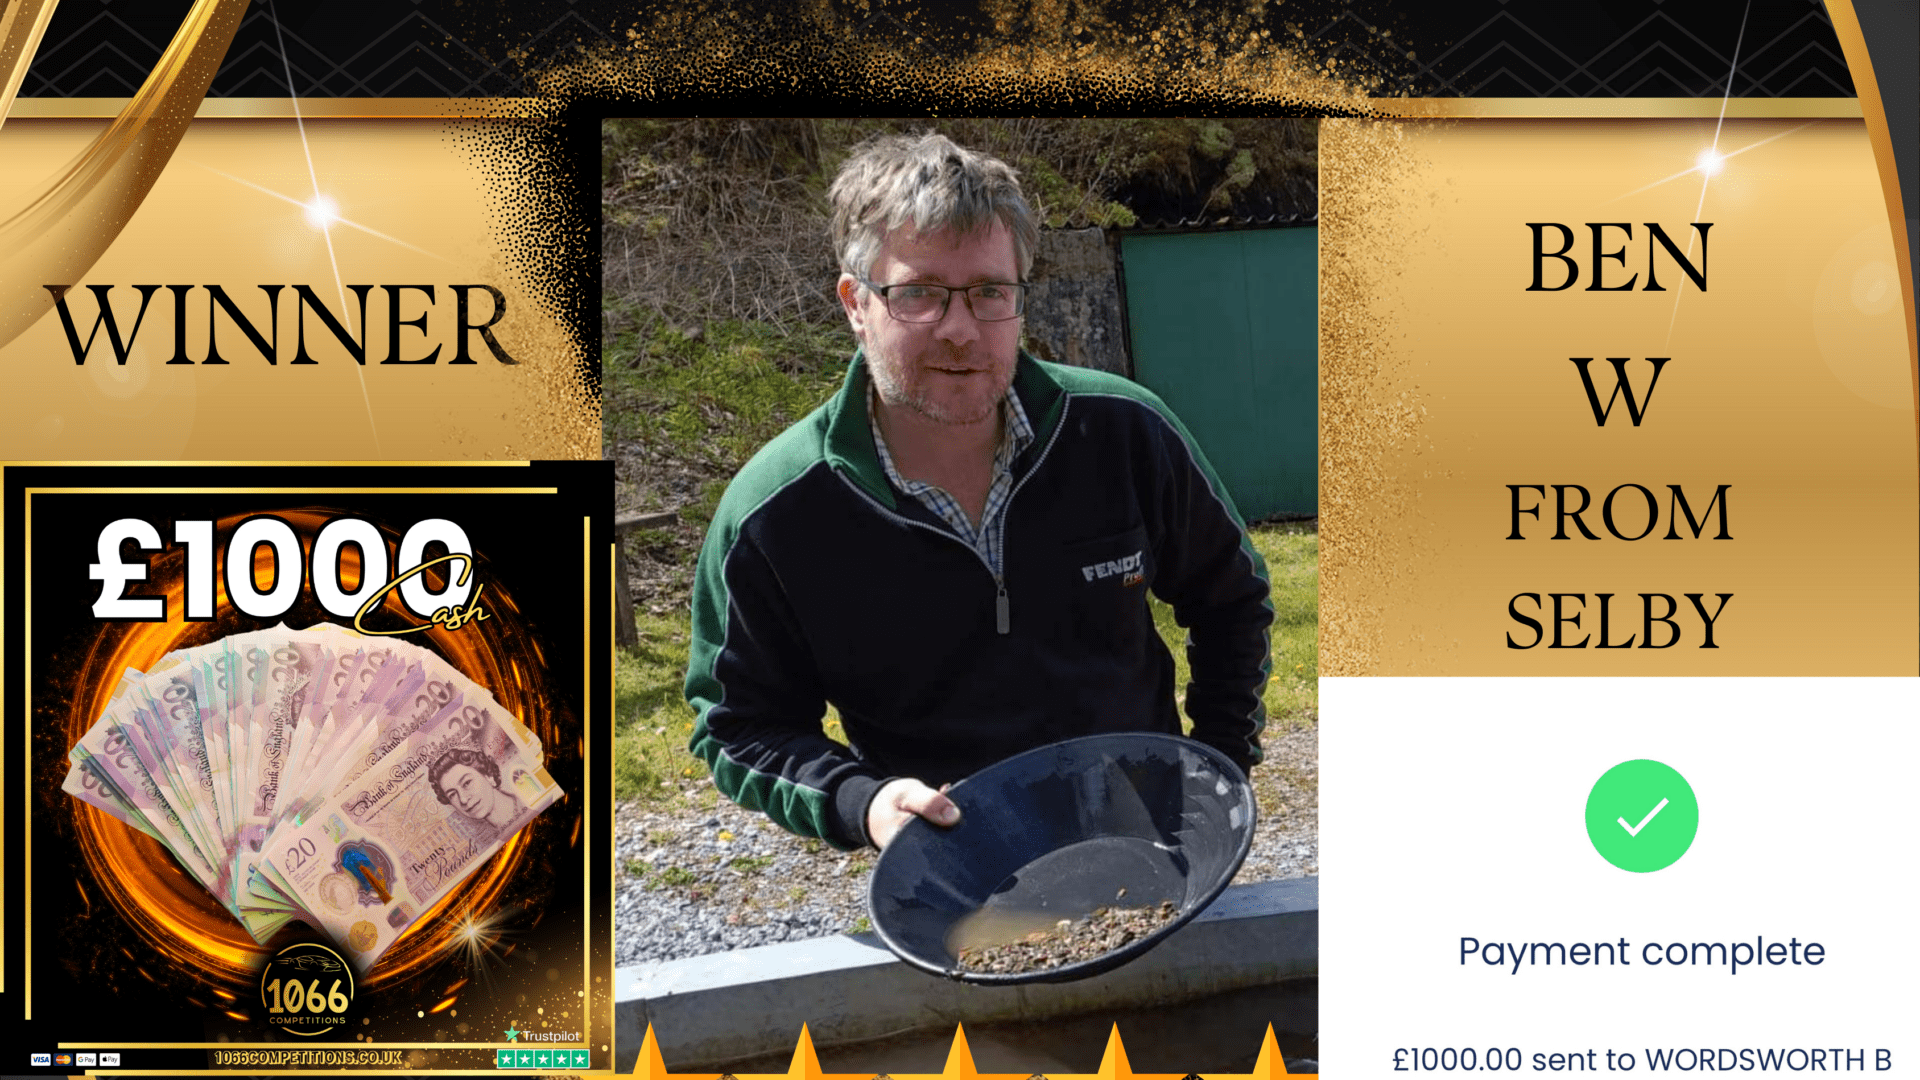 Congratulations to Ben Wordsworth from Selby, winner of £1000 cash while on a gold panning holiday!